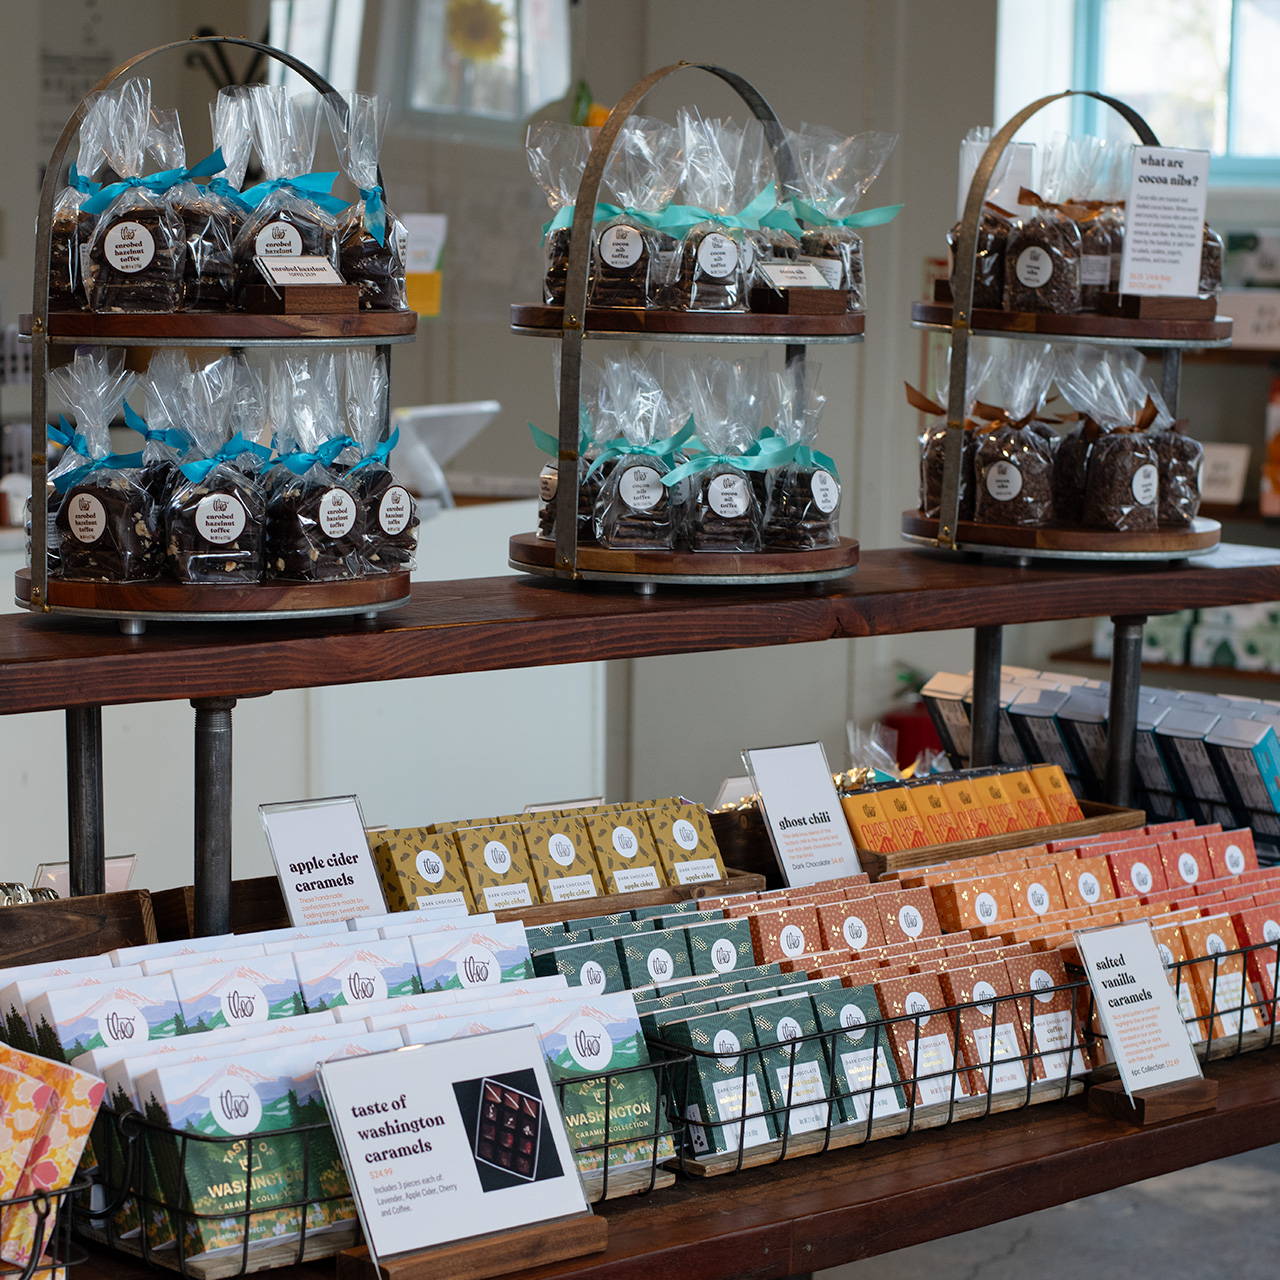 Handmade confection displays in the Flagship Store